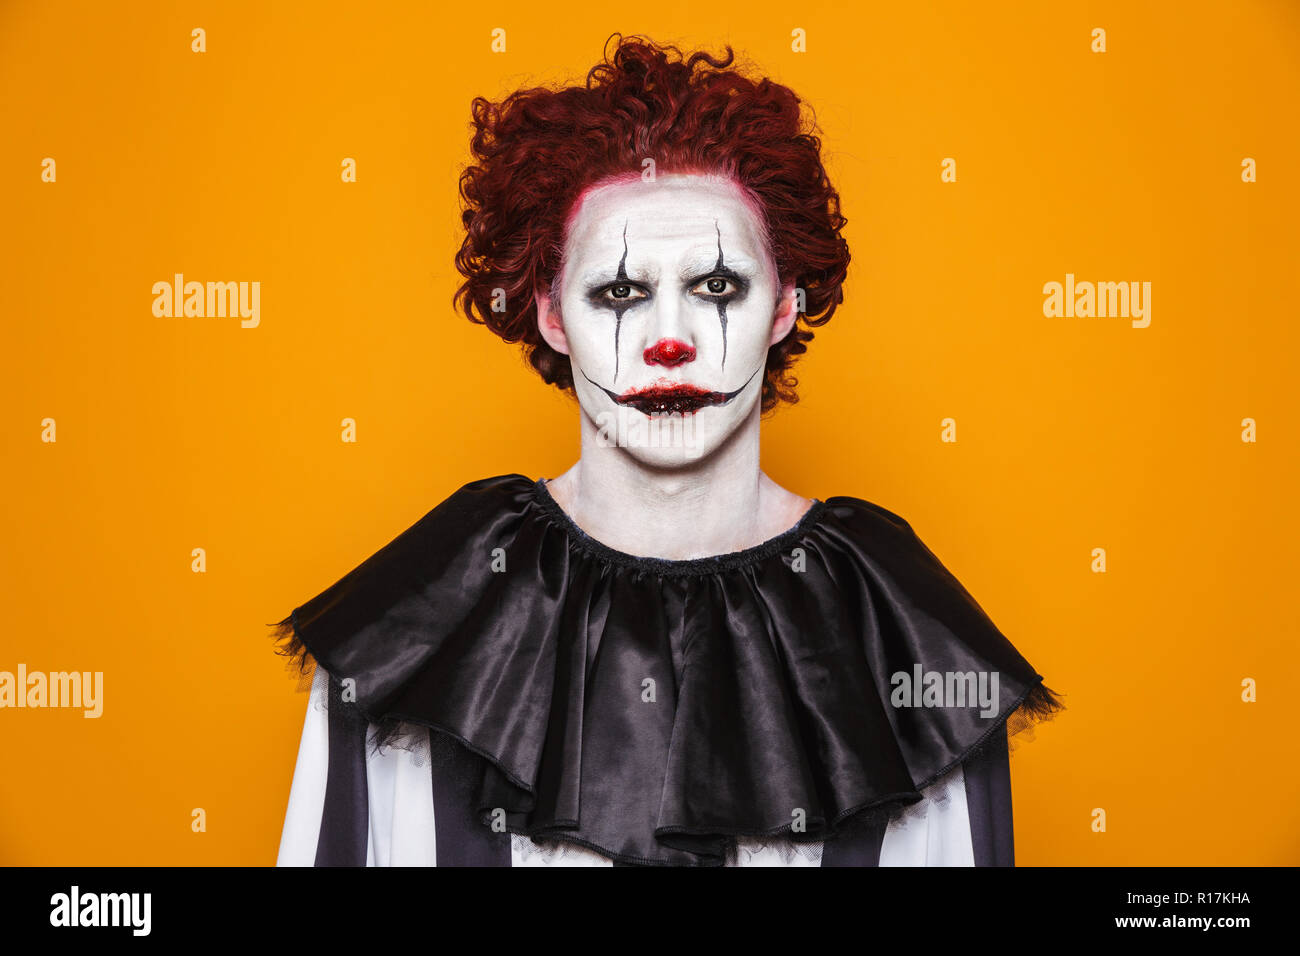 Sad clown man 20s wearing black costume and halloween makeup looking at camera isolated over yellow background Stock Photo